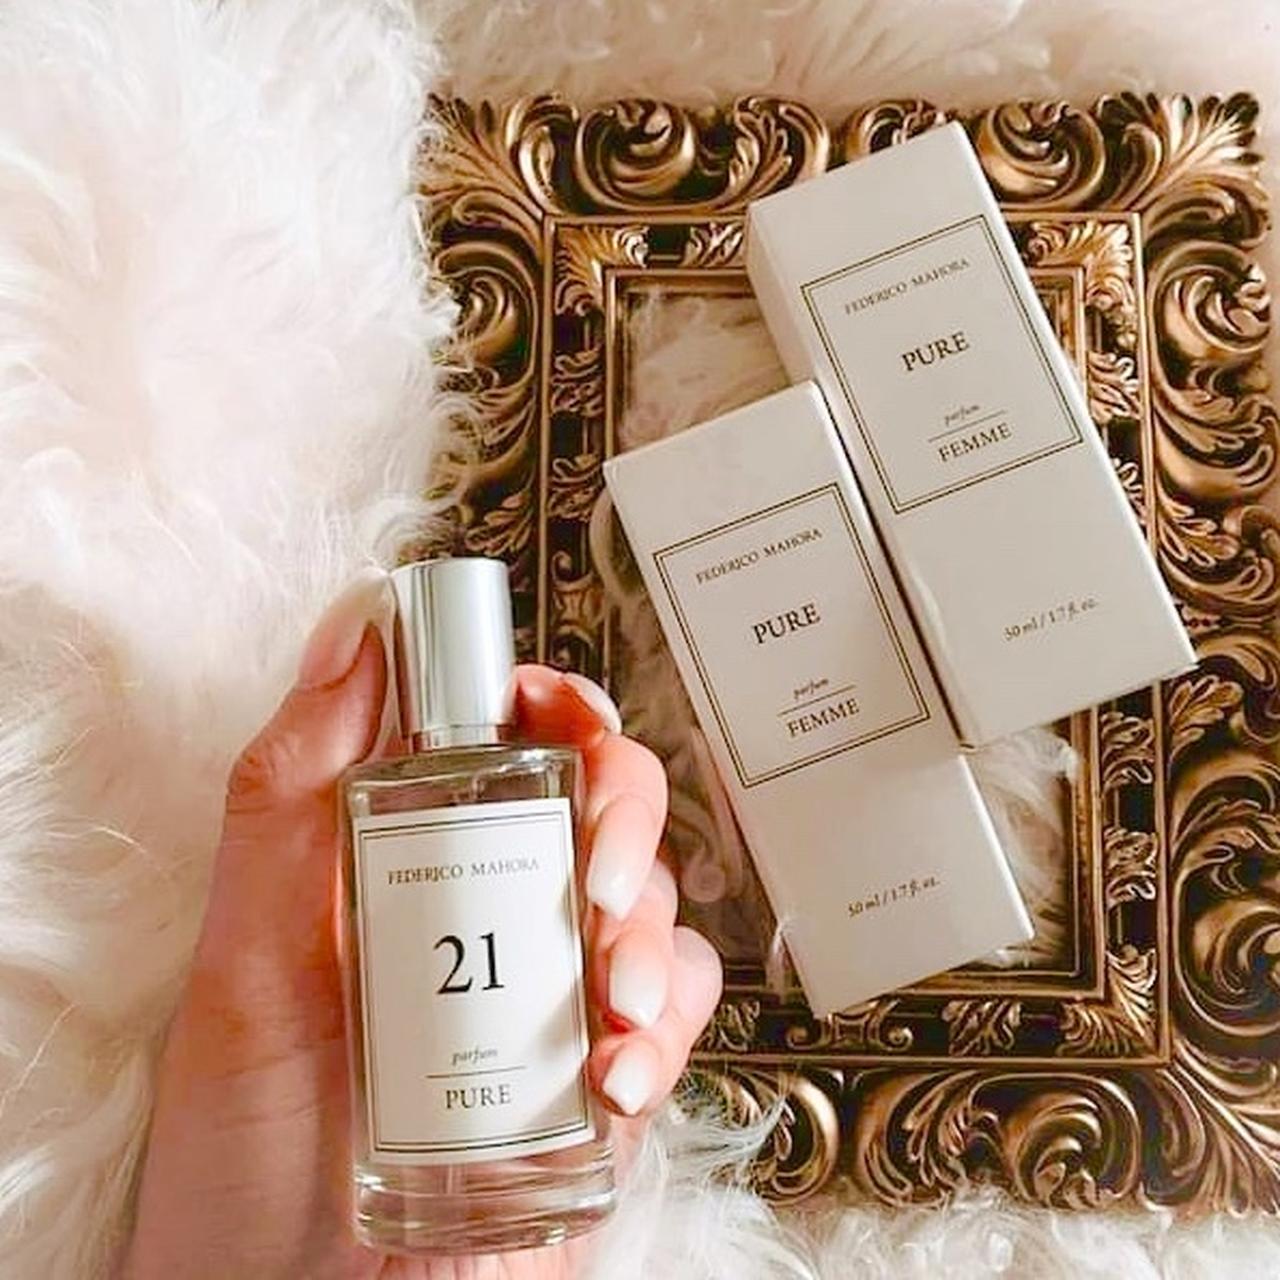 FM 21 inspired by Chanel No. 5 - FM Perfume Pure